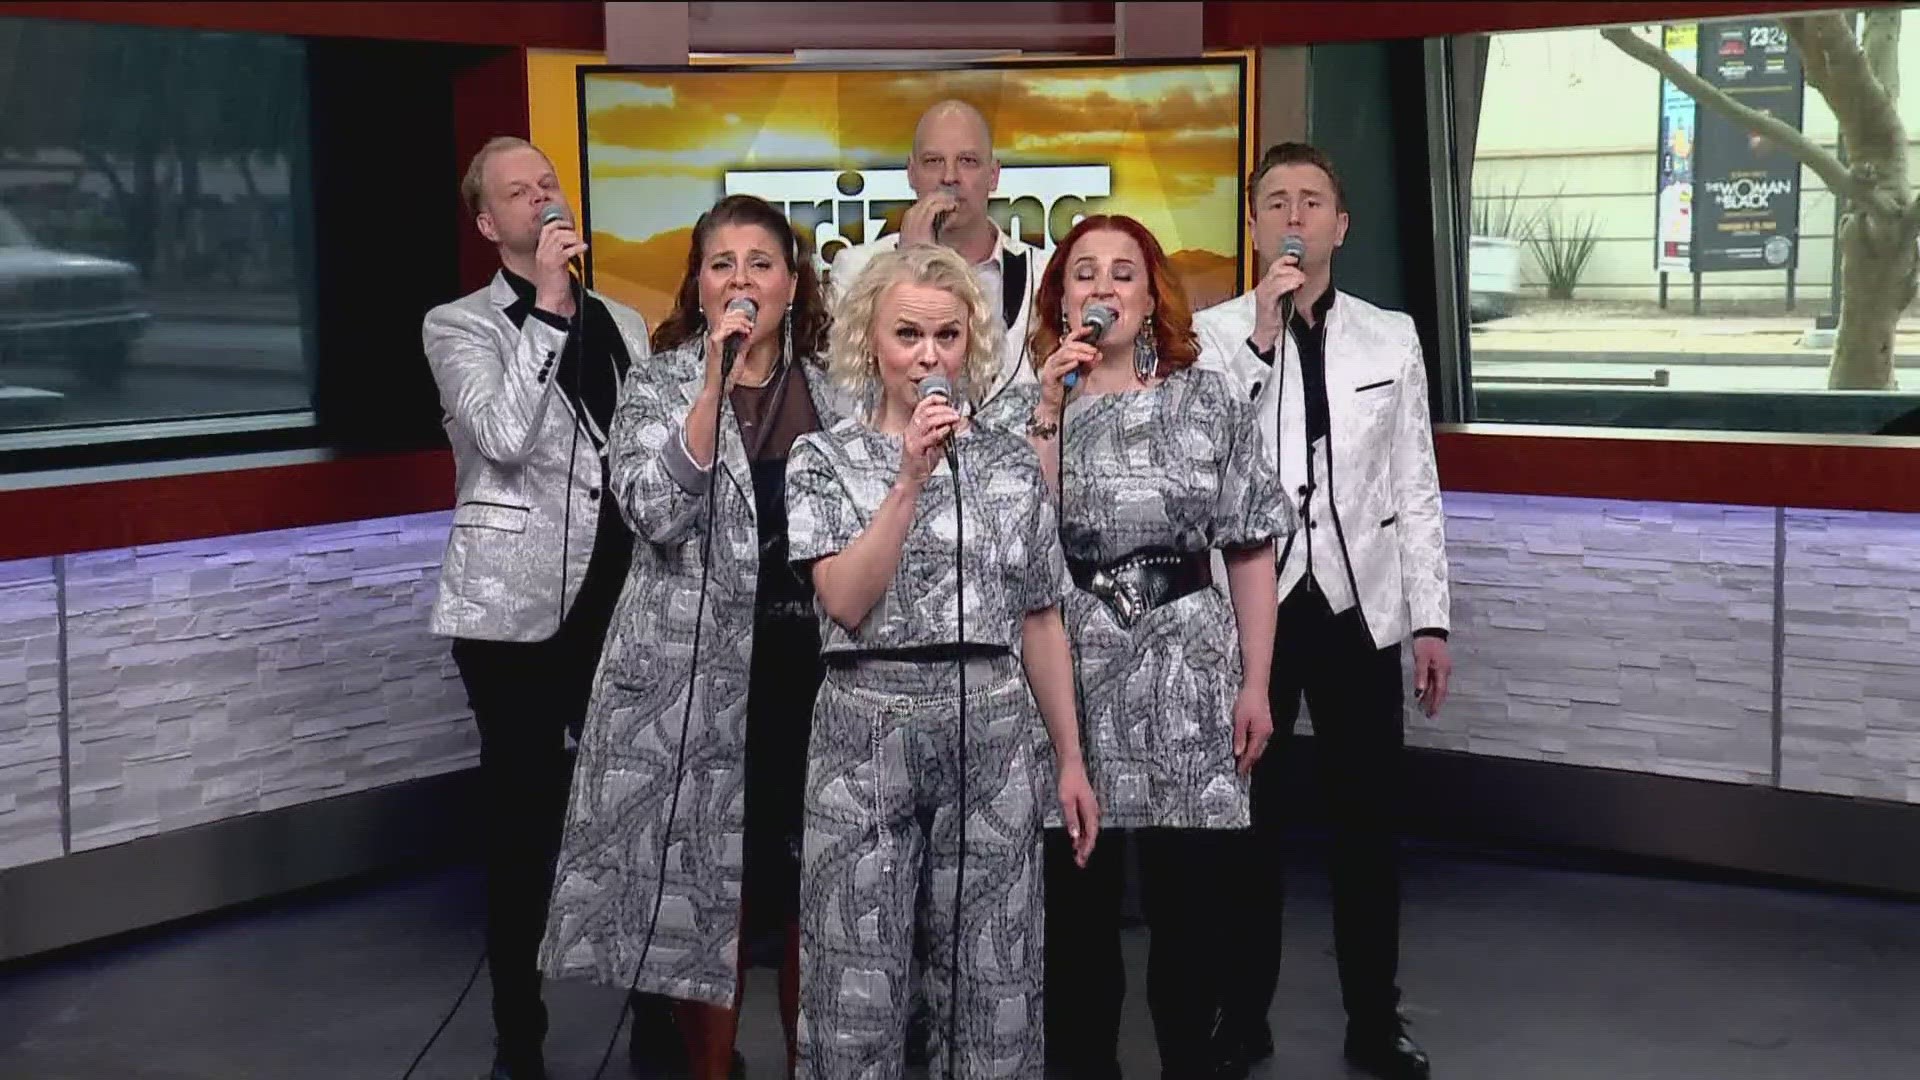 Finnish tribute band Rajaton stopped by our Arizona Midday studios to give us an acapella sneak peak at what we can expect this weekend at Symphony Hall.